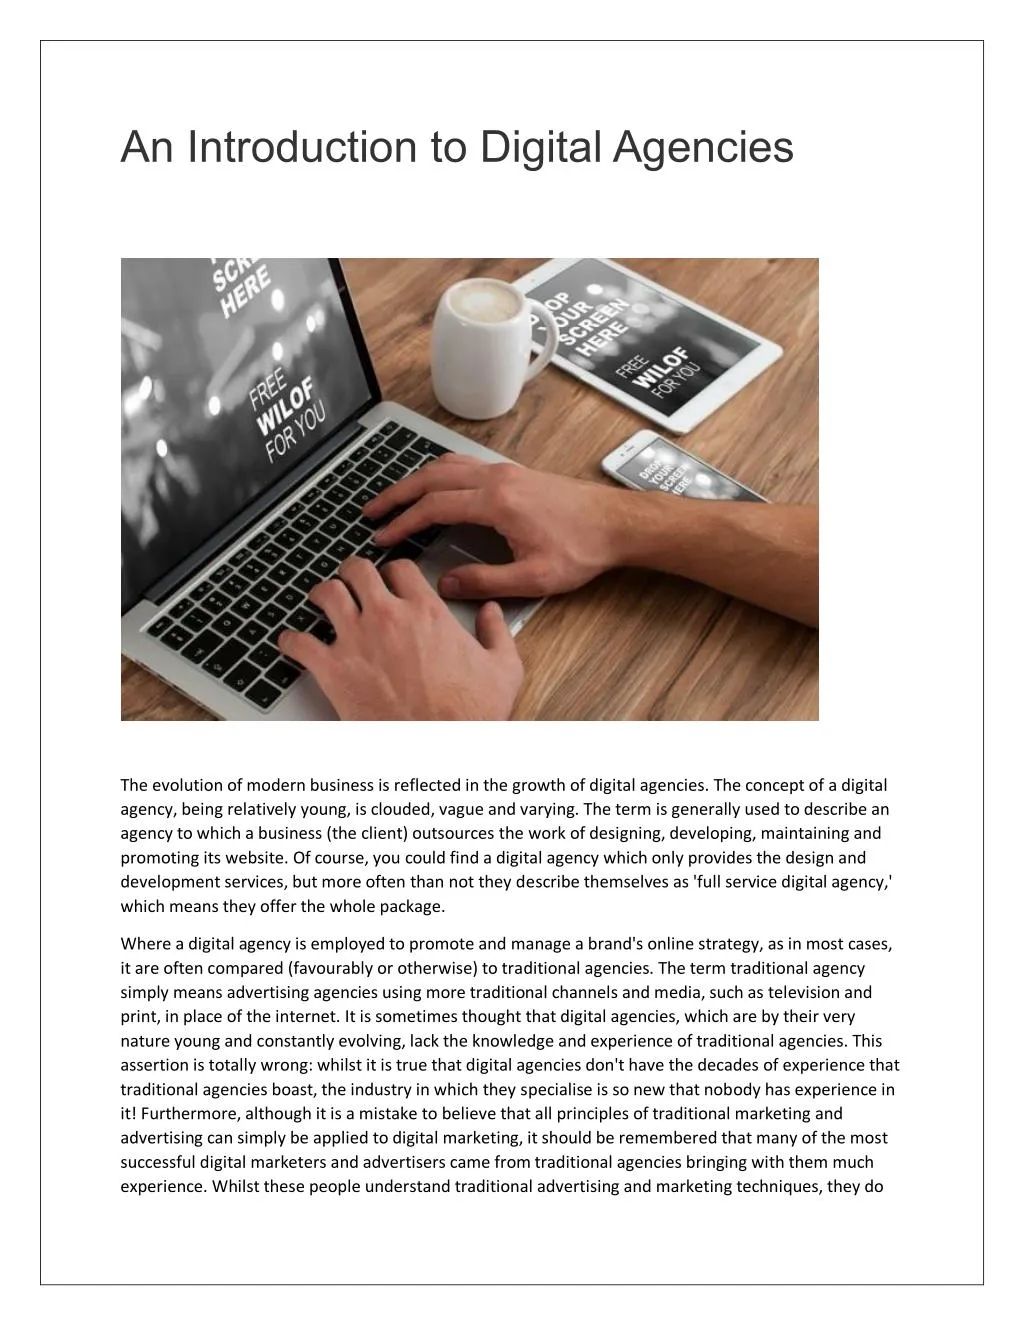 an introduction to digital agencies